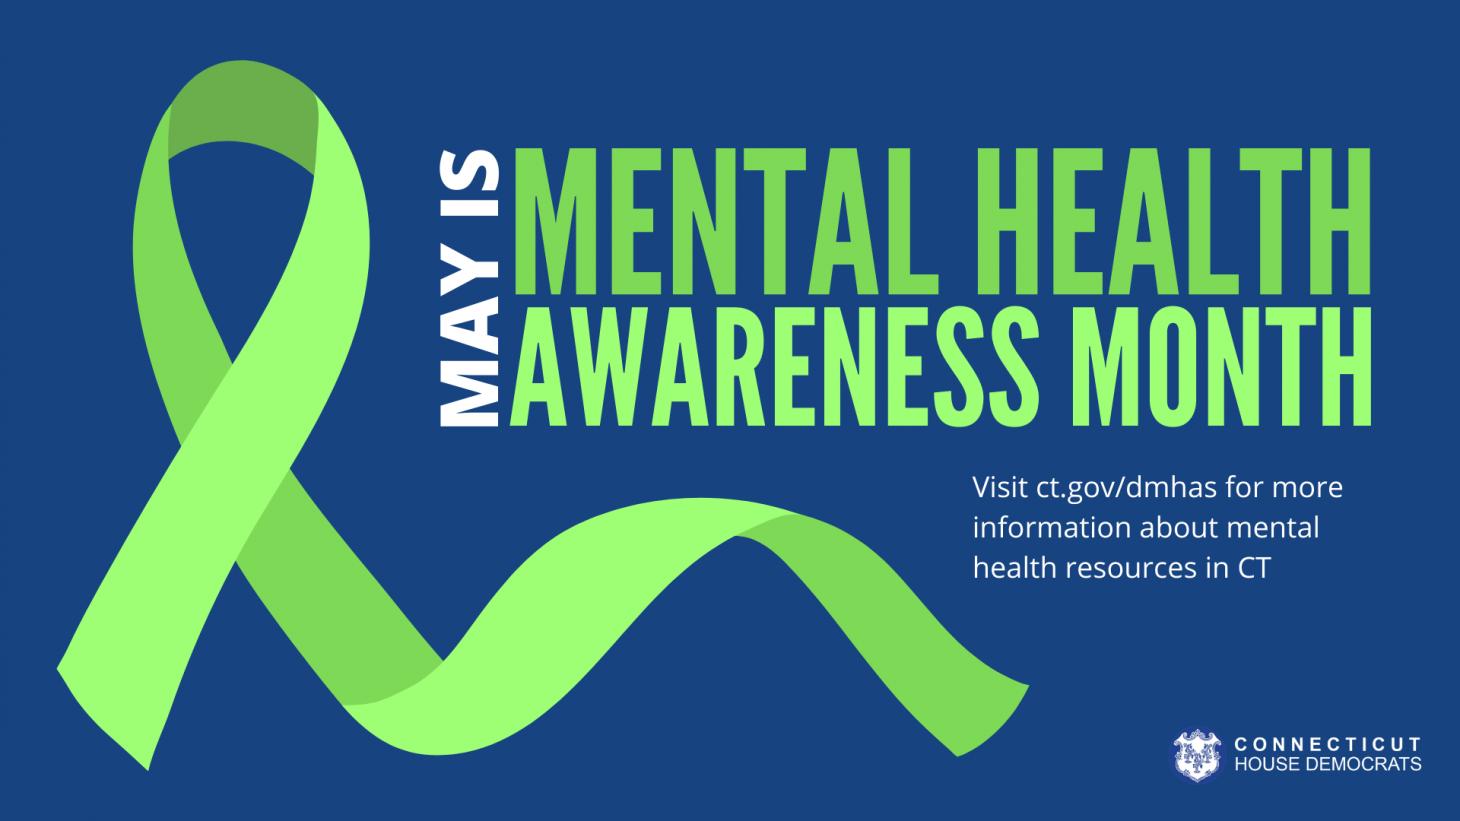 mental-health-awareness-month-connecticut-house-democrats